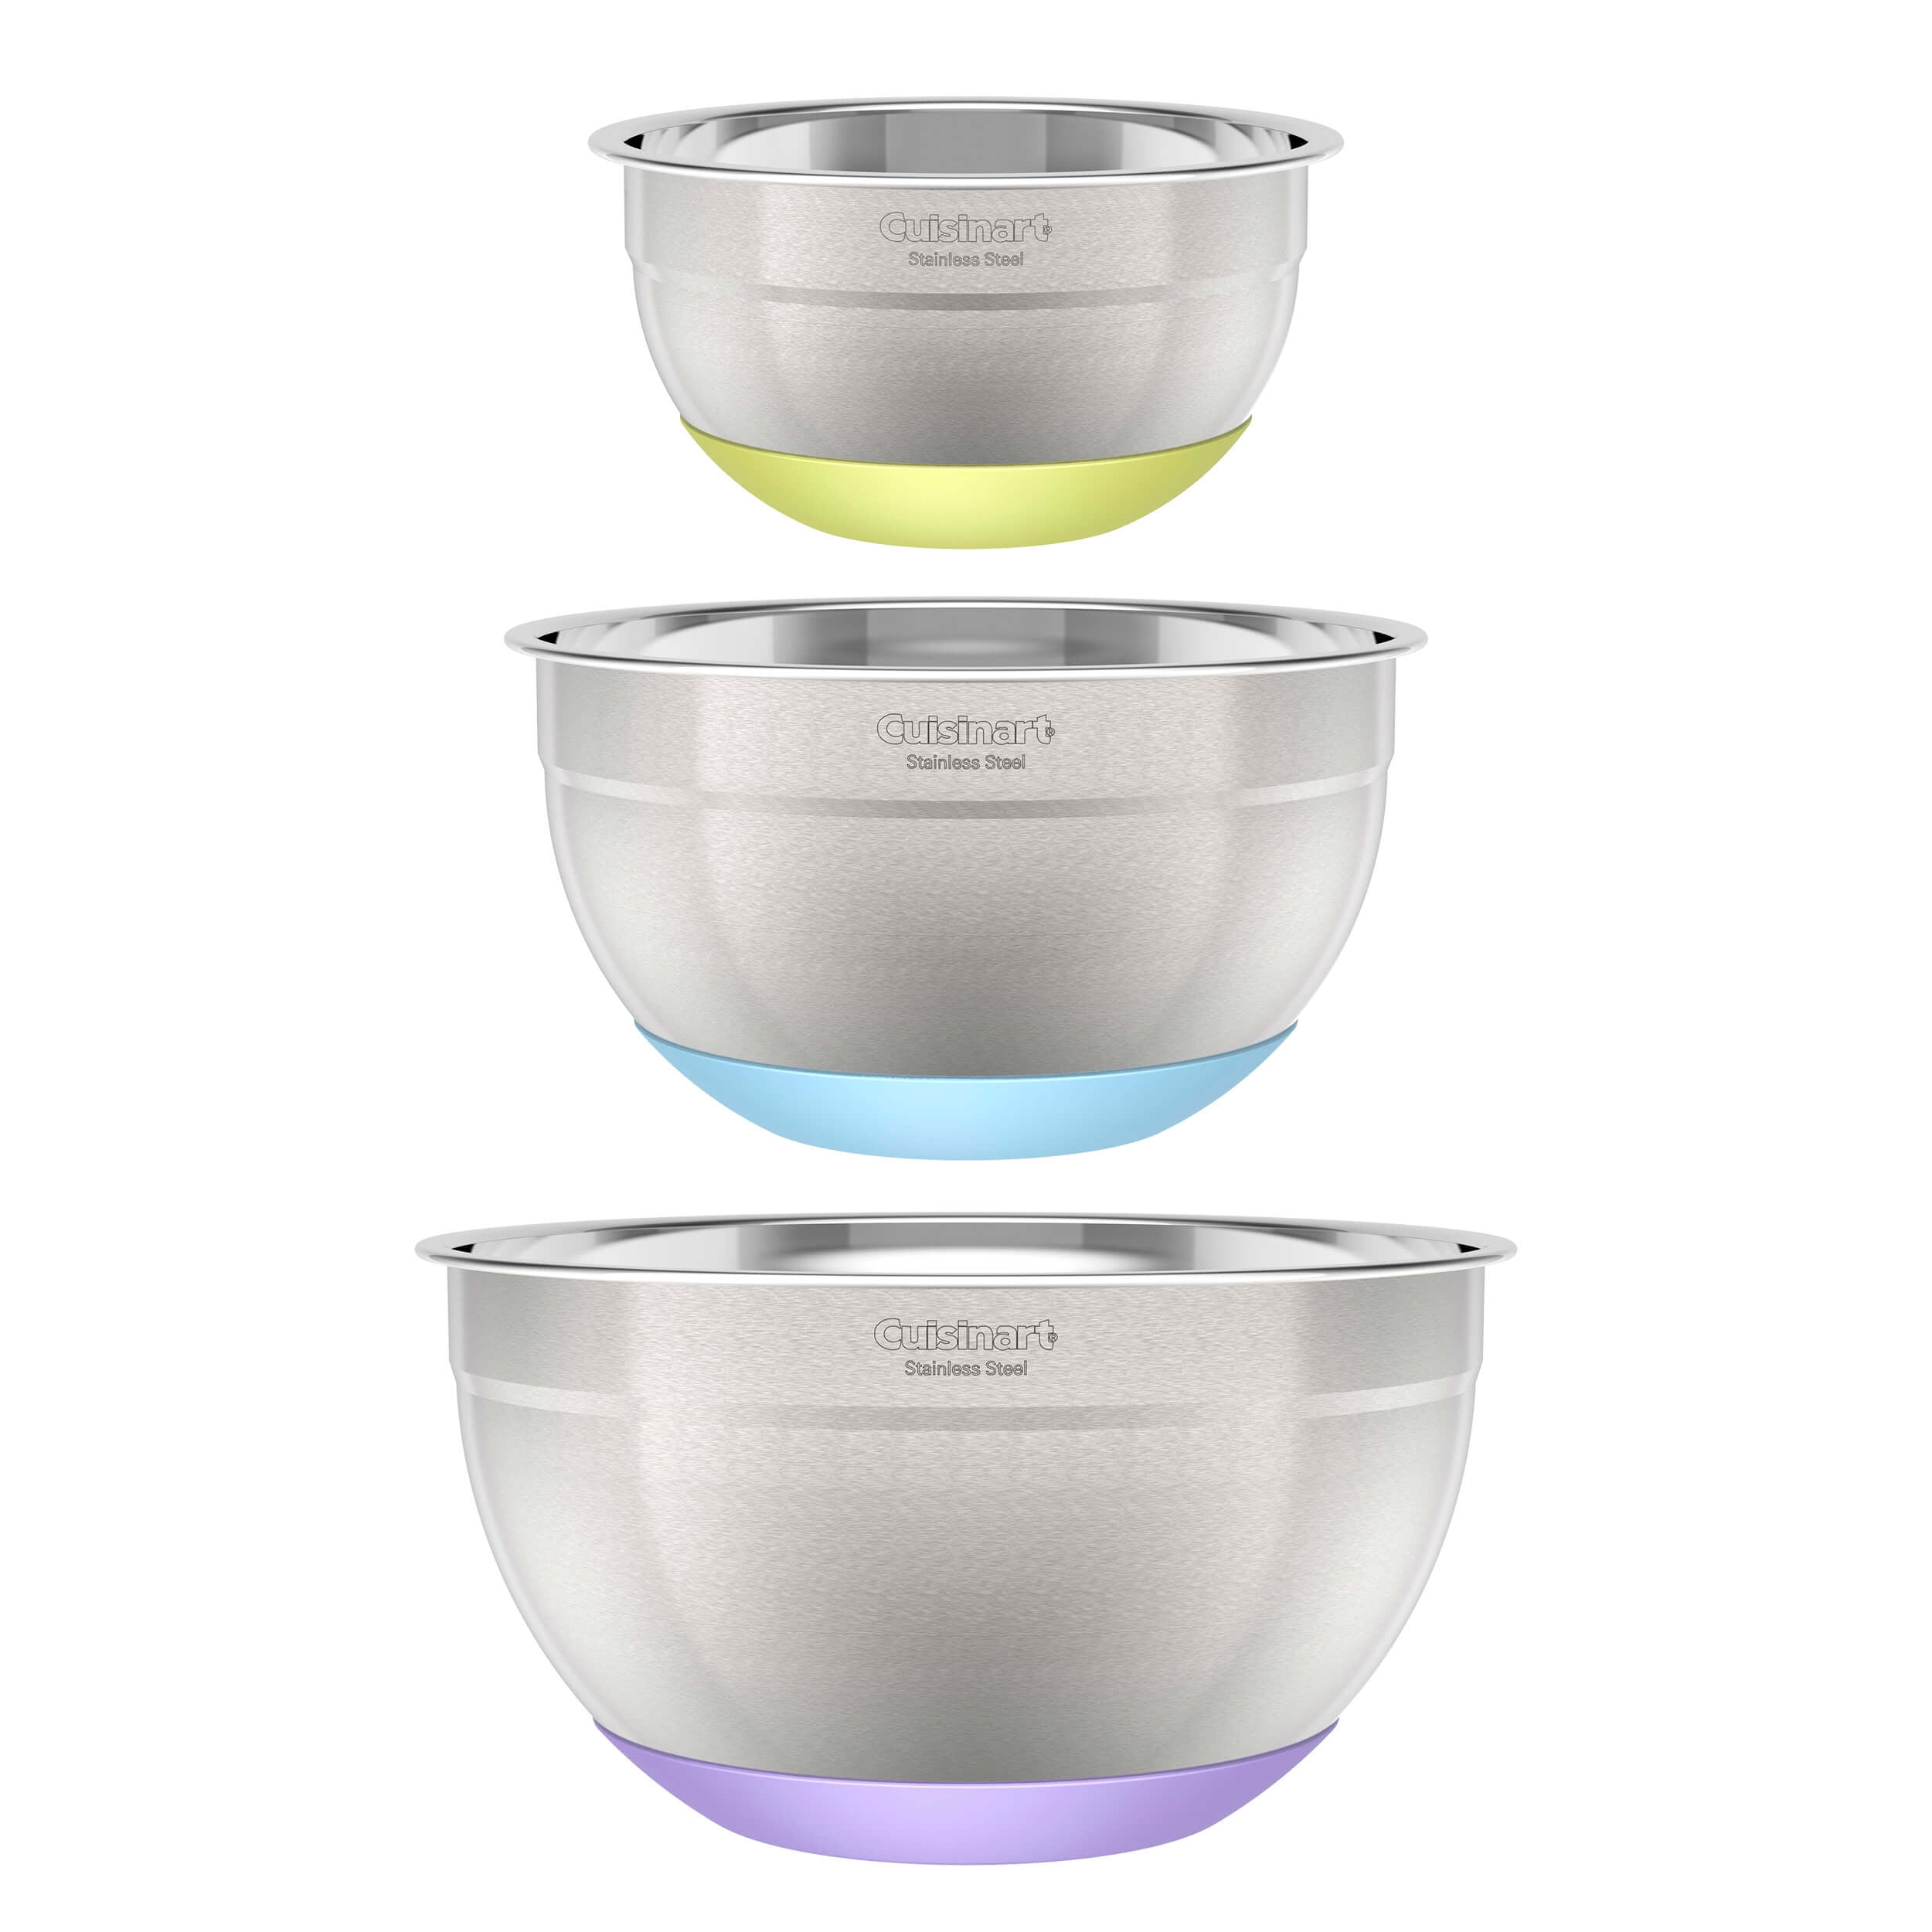 Cuisinart CTG-00-SMB Stainless Steel Mixing Bowls with Lids Set of 3 